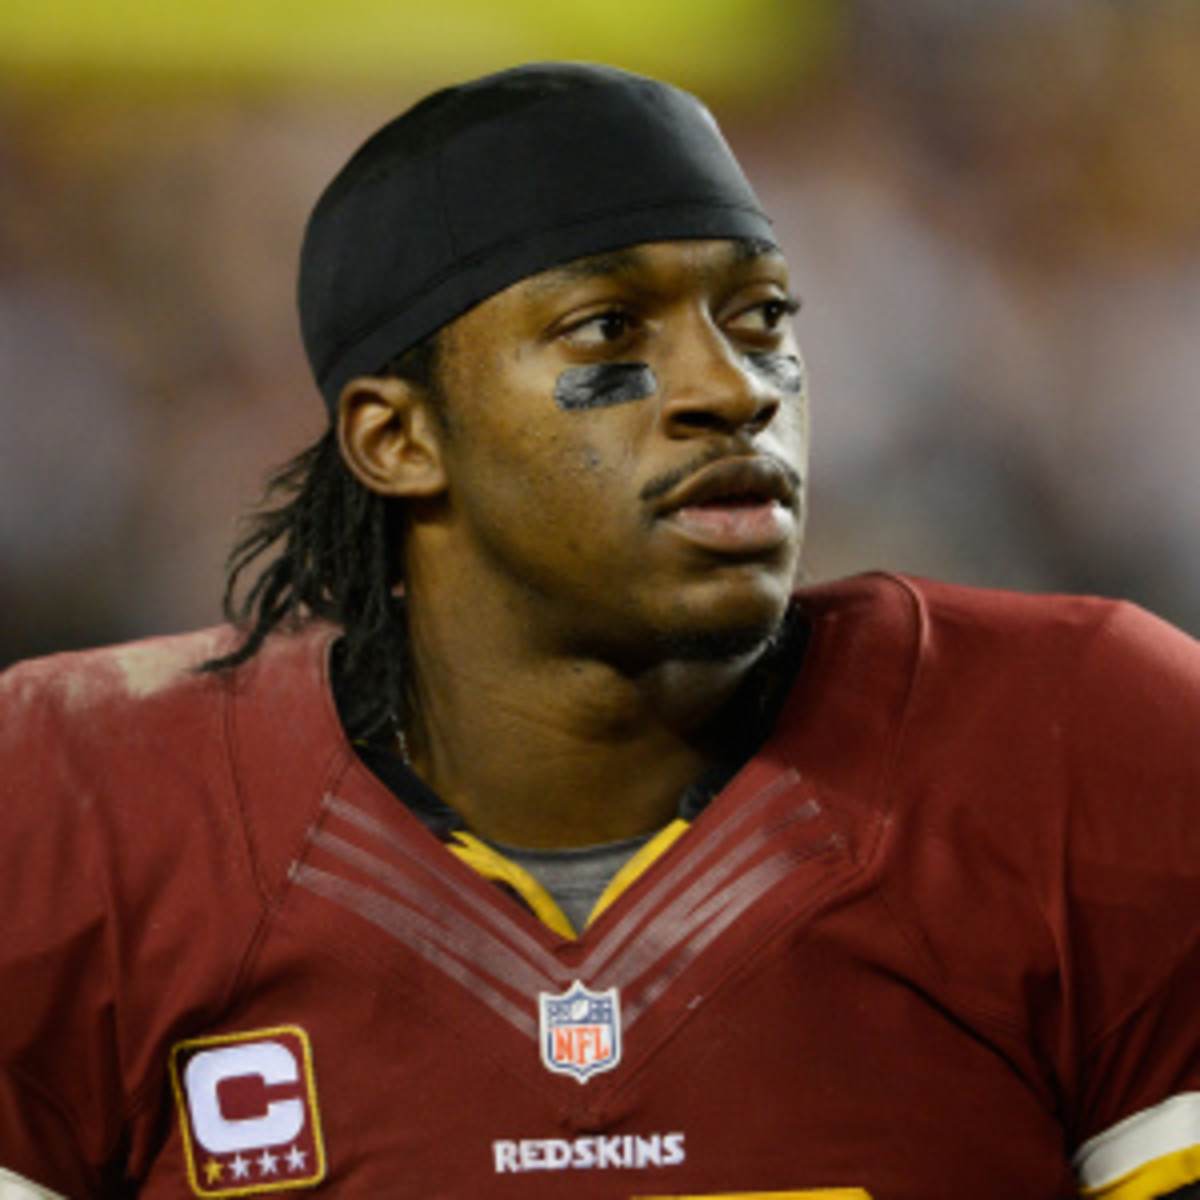 The Redskins believe Robert Griffin III could be their Week 1 starting quarterback. (Patrick McDermott/Getty Images)